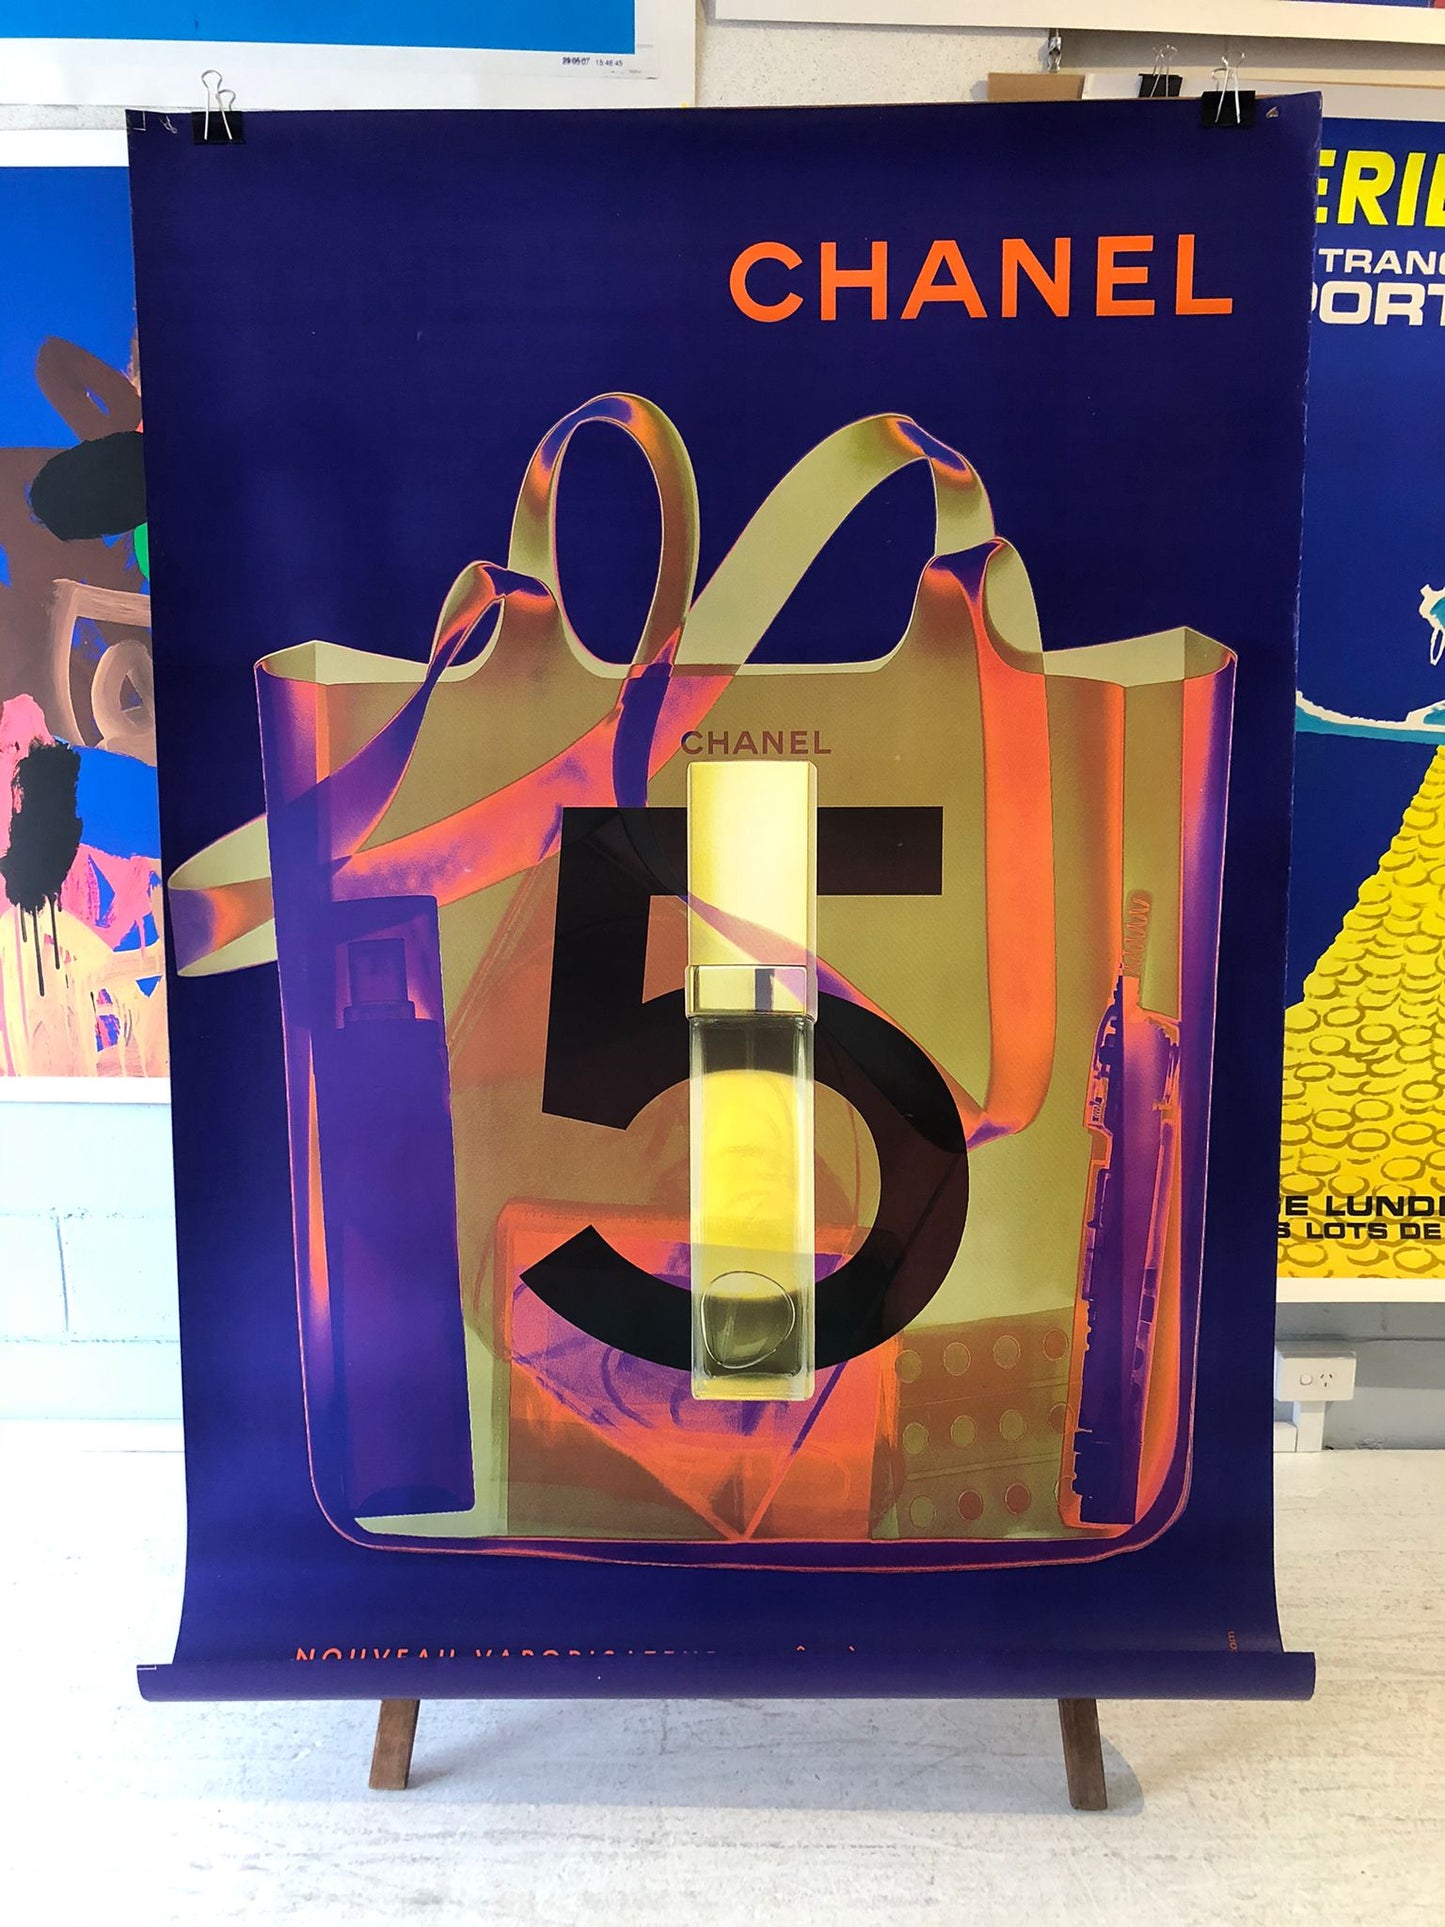 Original poster Chanel n°5 pink and blue - 67 x 47 inches